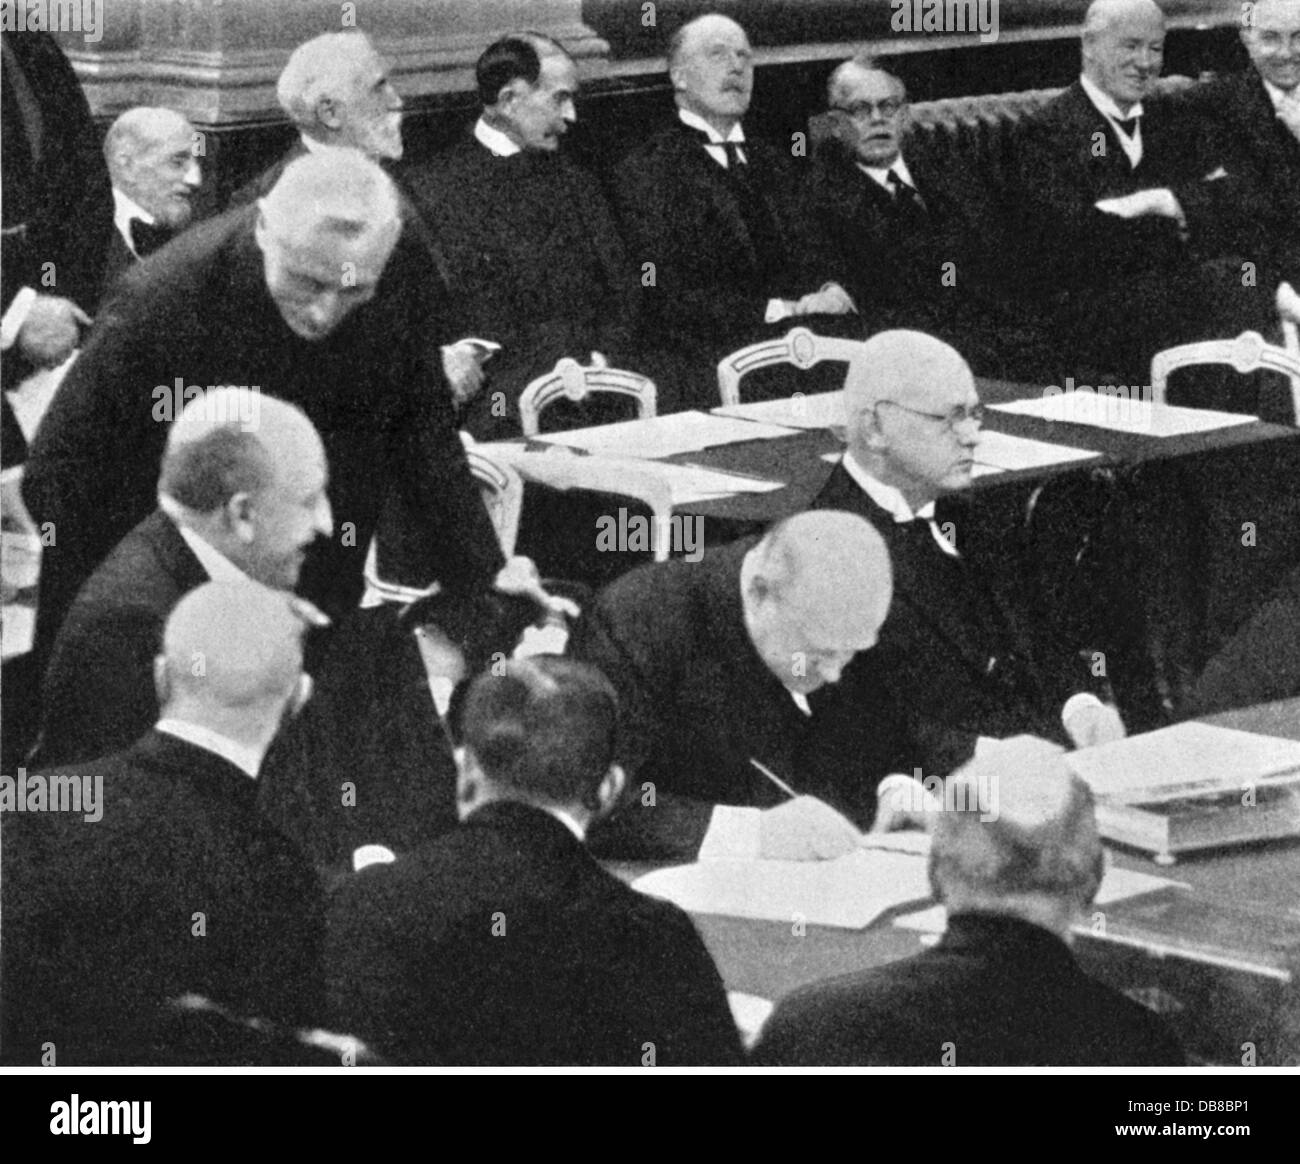 politics,conference,Locarno conference 5.- 16.10.1925,German delegation signing the final protocol,Locarno,16.10.1925,20th century,1920s,20s,Europe,Germany,Weimar Republic,politics,politician,politicians,diplomacy,diplomat,diplomatist,diplomats,diplomatists,western border,guarantee,guaranty,guarantees,guaranties,League of Nations,revisionist policy,Locarno Treaties,half length,sitting,sit,signing of the agreement,execution of the contract,undersign,undersigning,sign,signing,treaty,treaties,fltr: Carl von Schubert,permanen,Additional-Rights-Clearences-Not Available Stock Photo